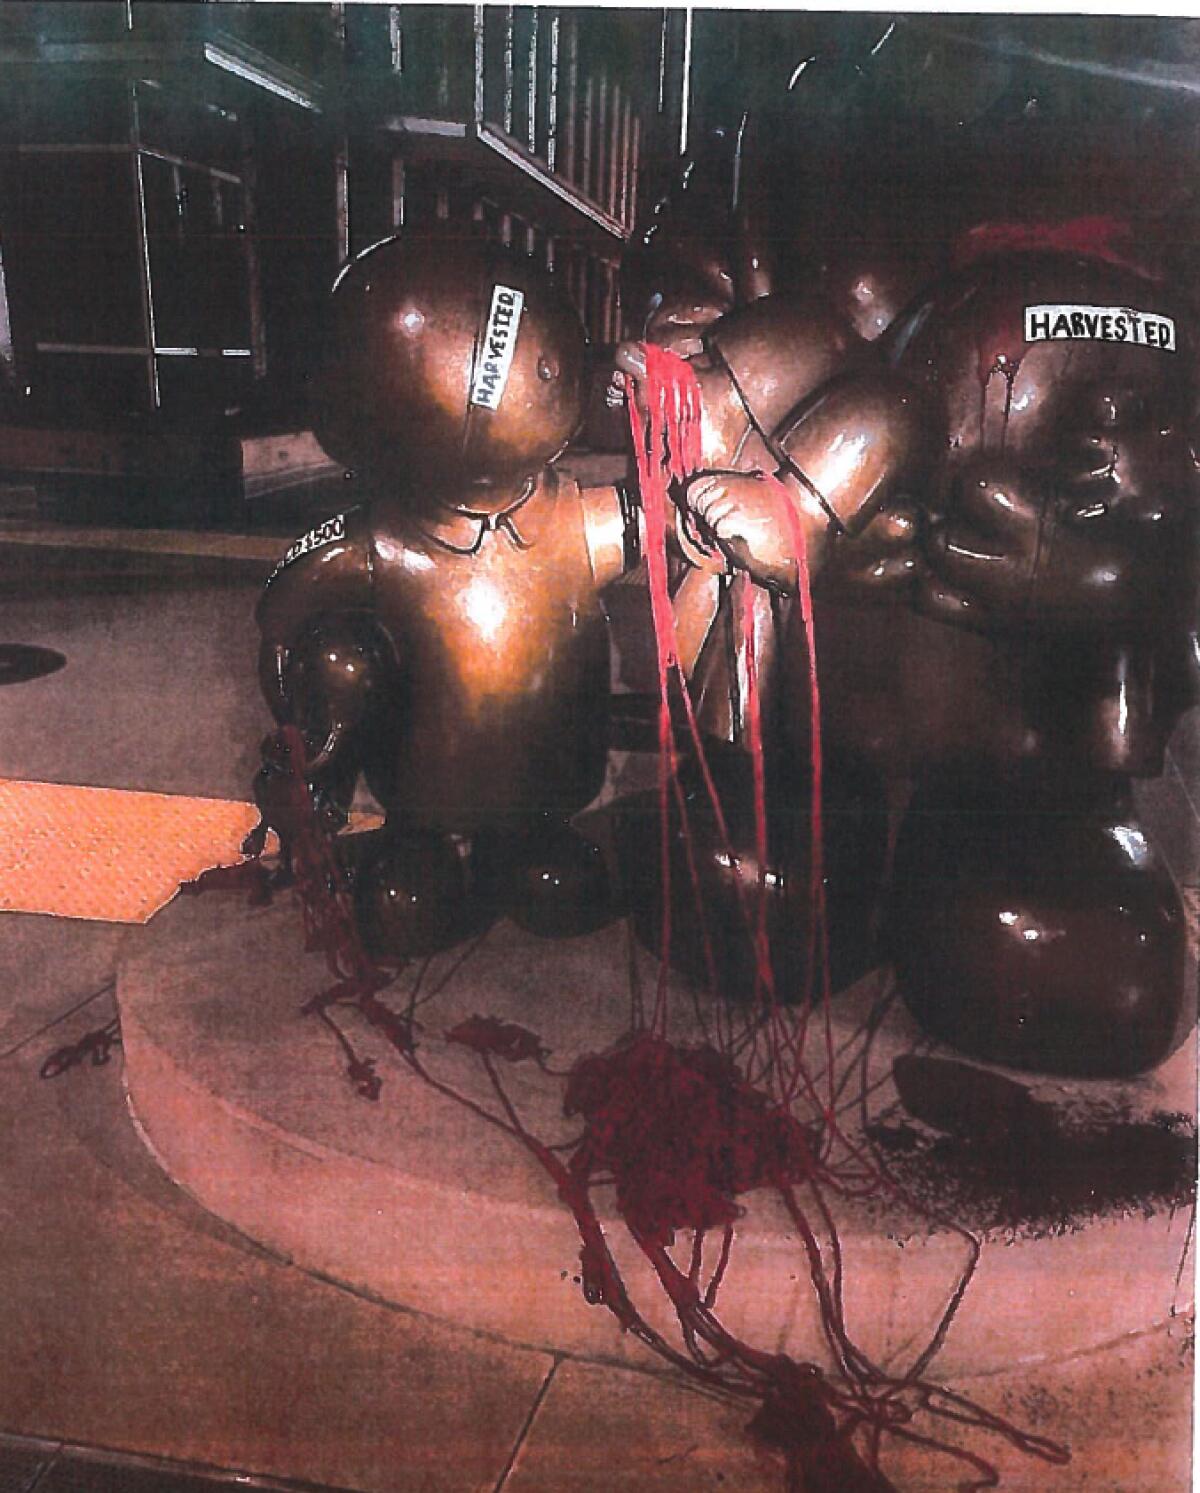 A statue defaced with fake blood and stickers that say "harvested"